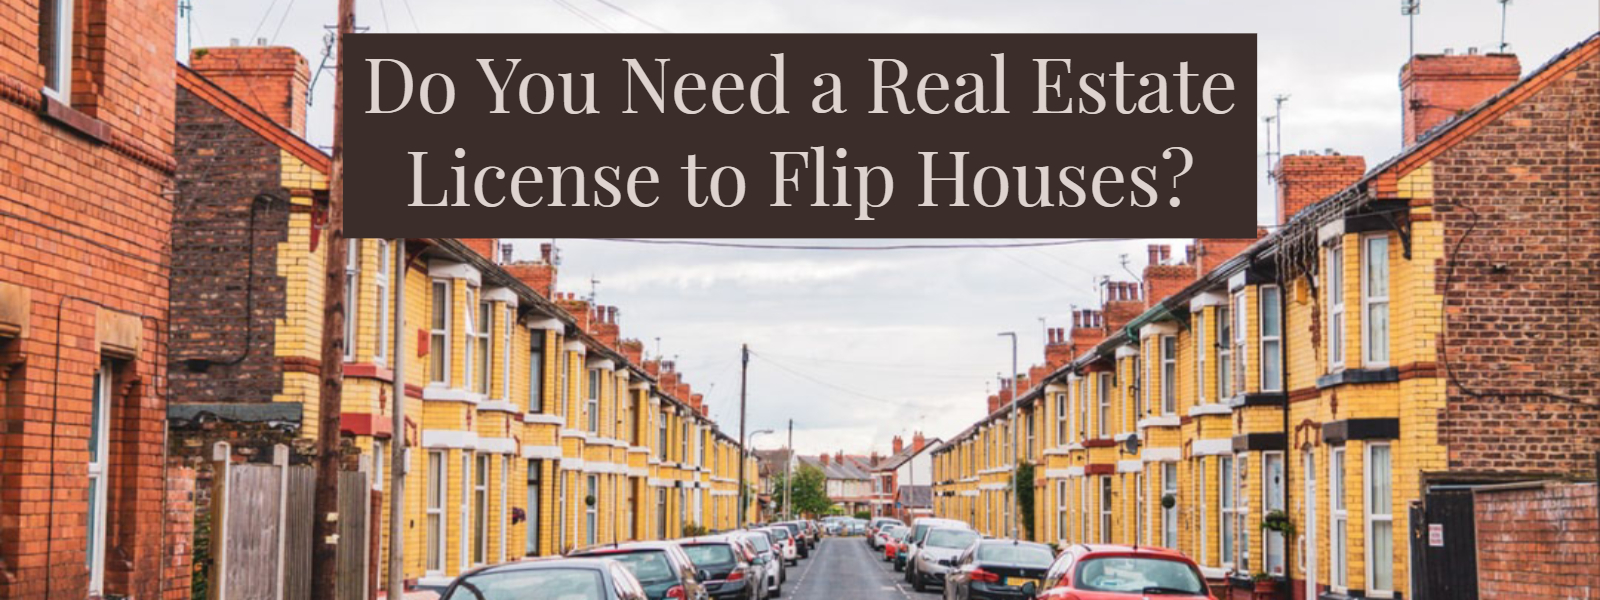  “Do You Need a Real Estate License to Flip Houses?” No.